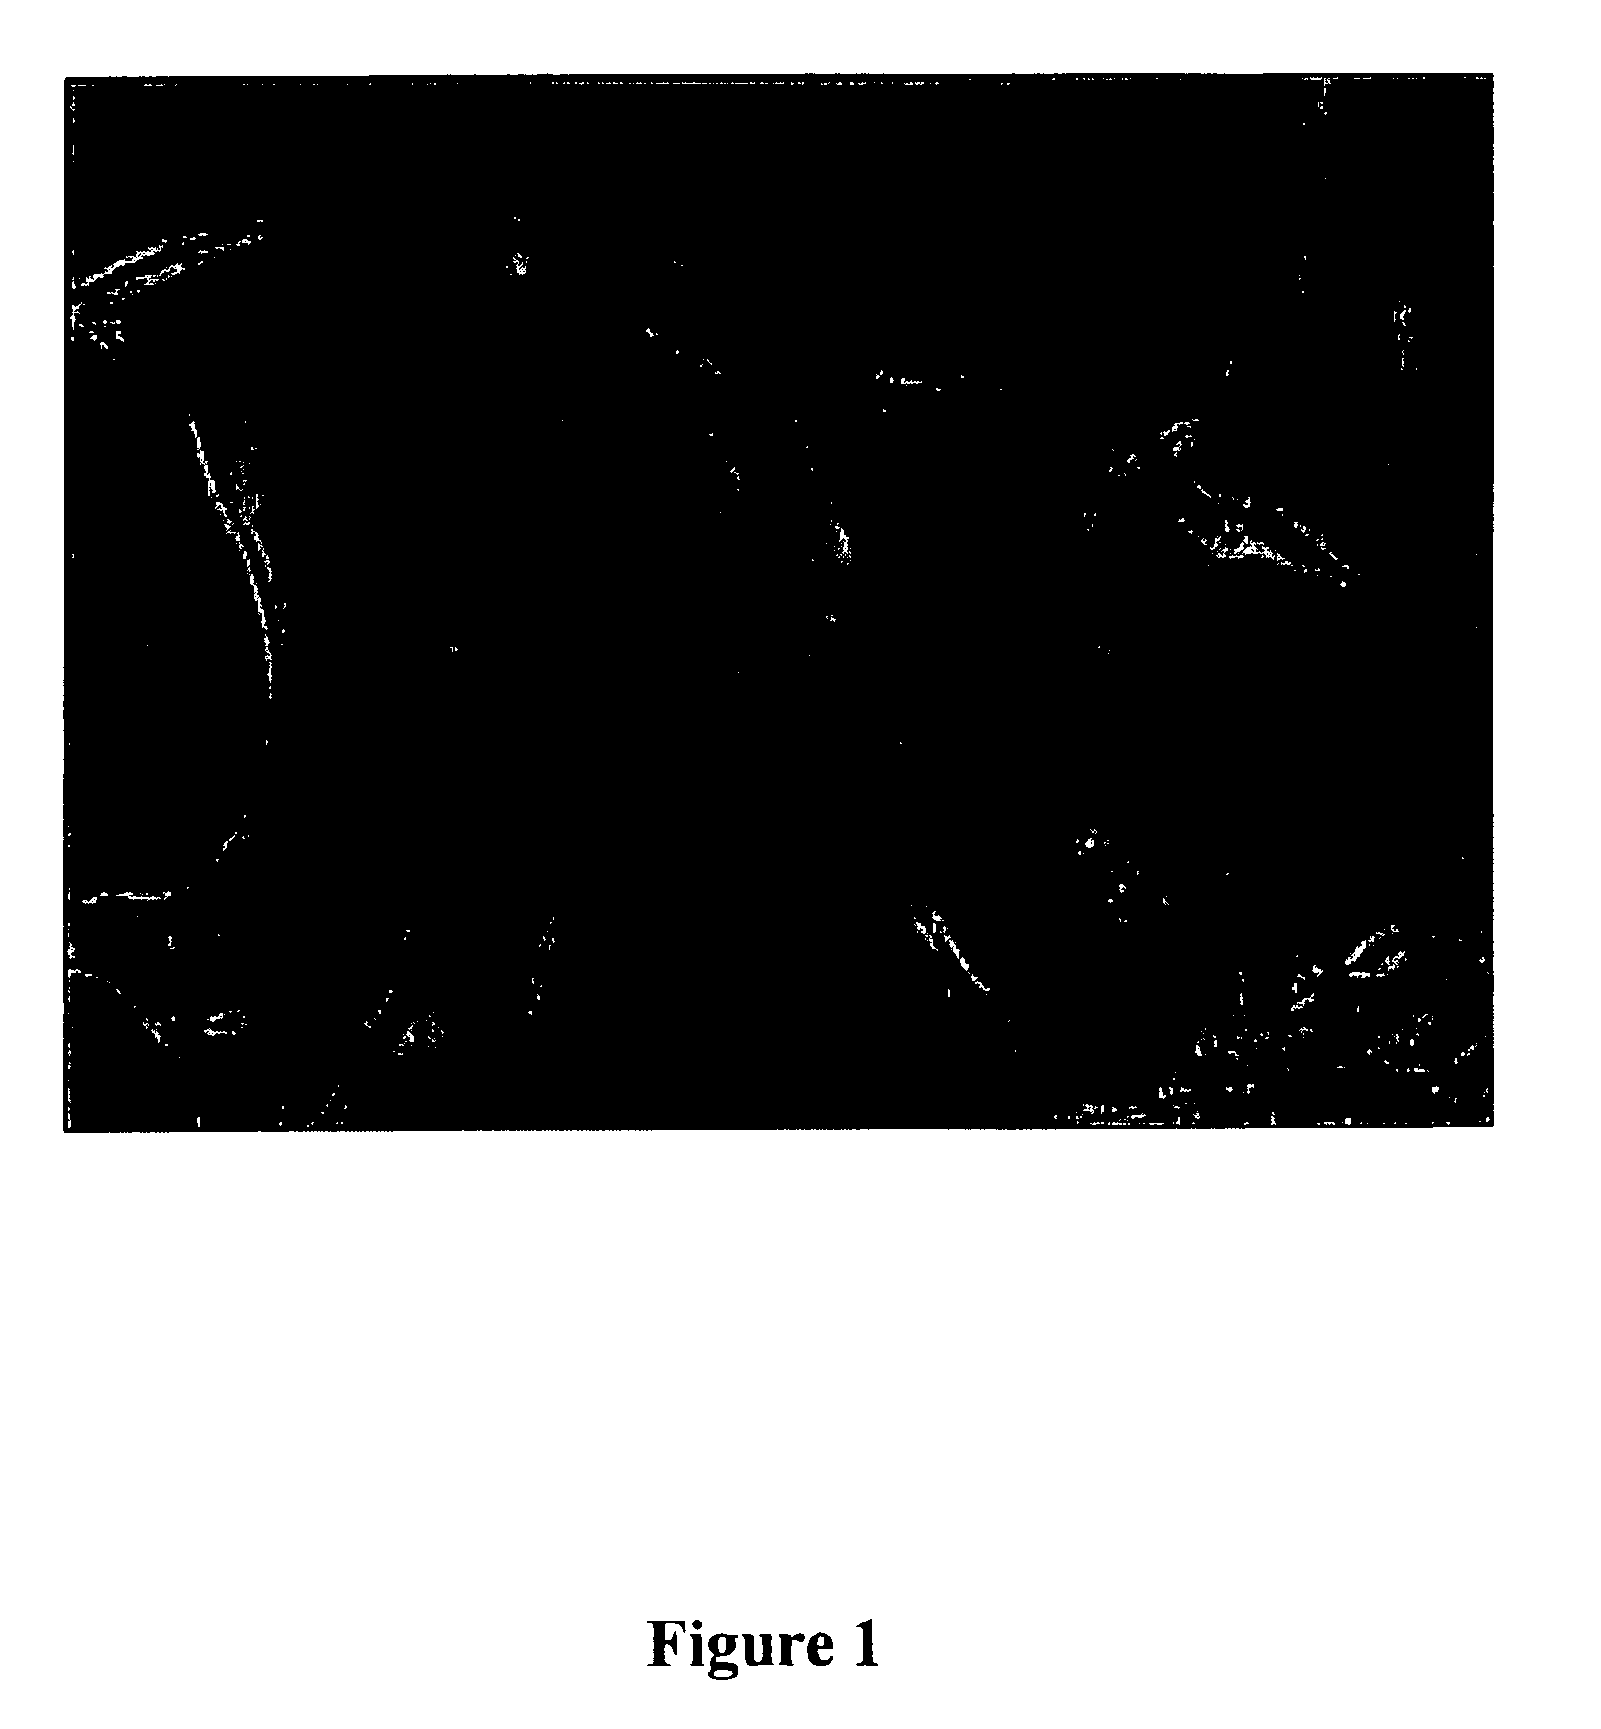 Cell culture medium containing growth factors and L-glutamine